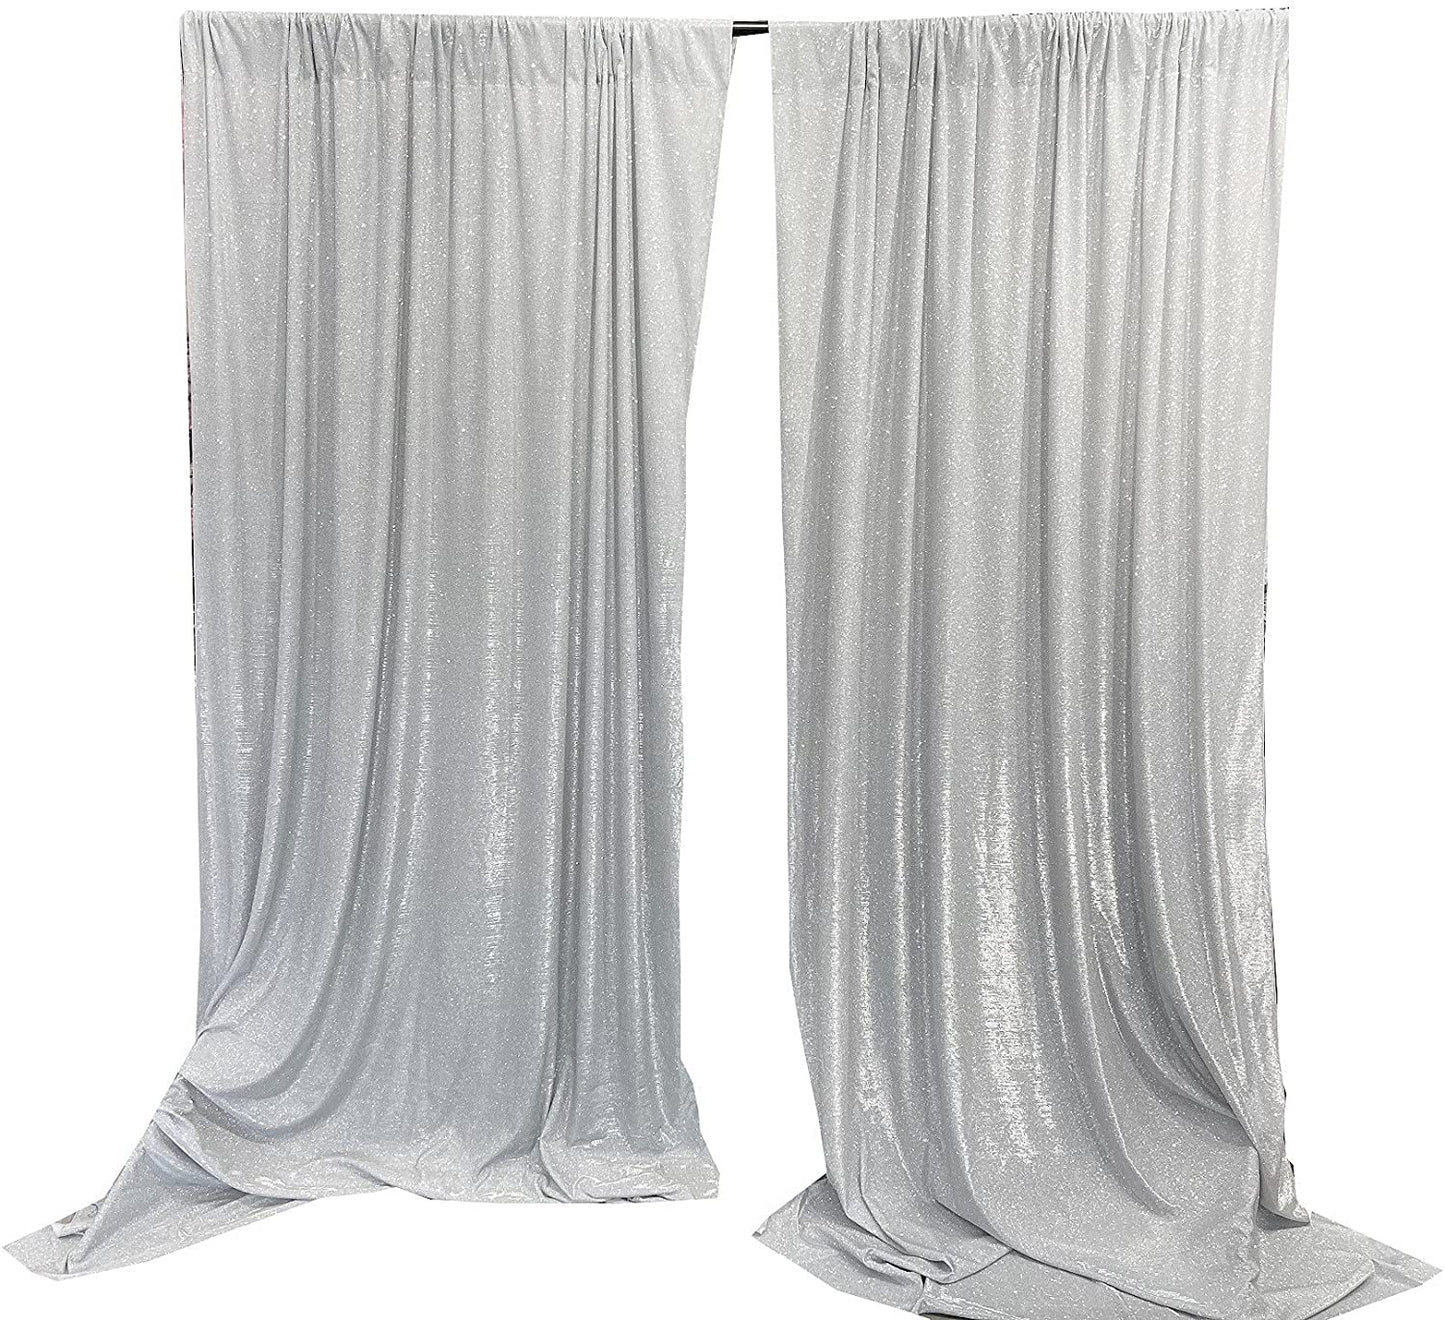 Full Covered Glitter Shimmer on Fabric Backdrop Drape - Curtain - Wedding Party Decoration (2 Panels Silver